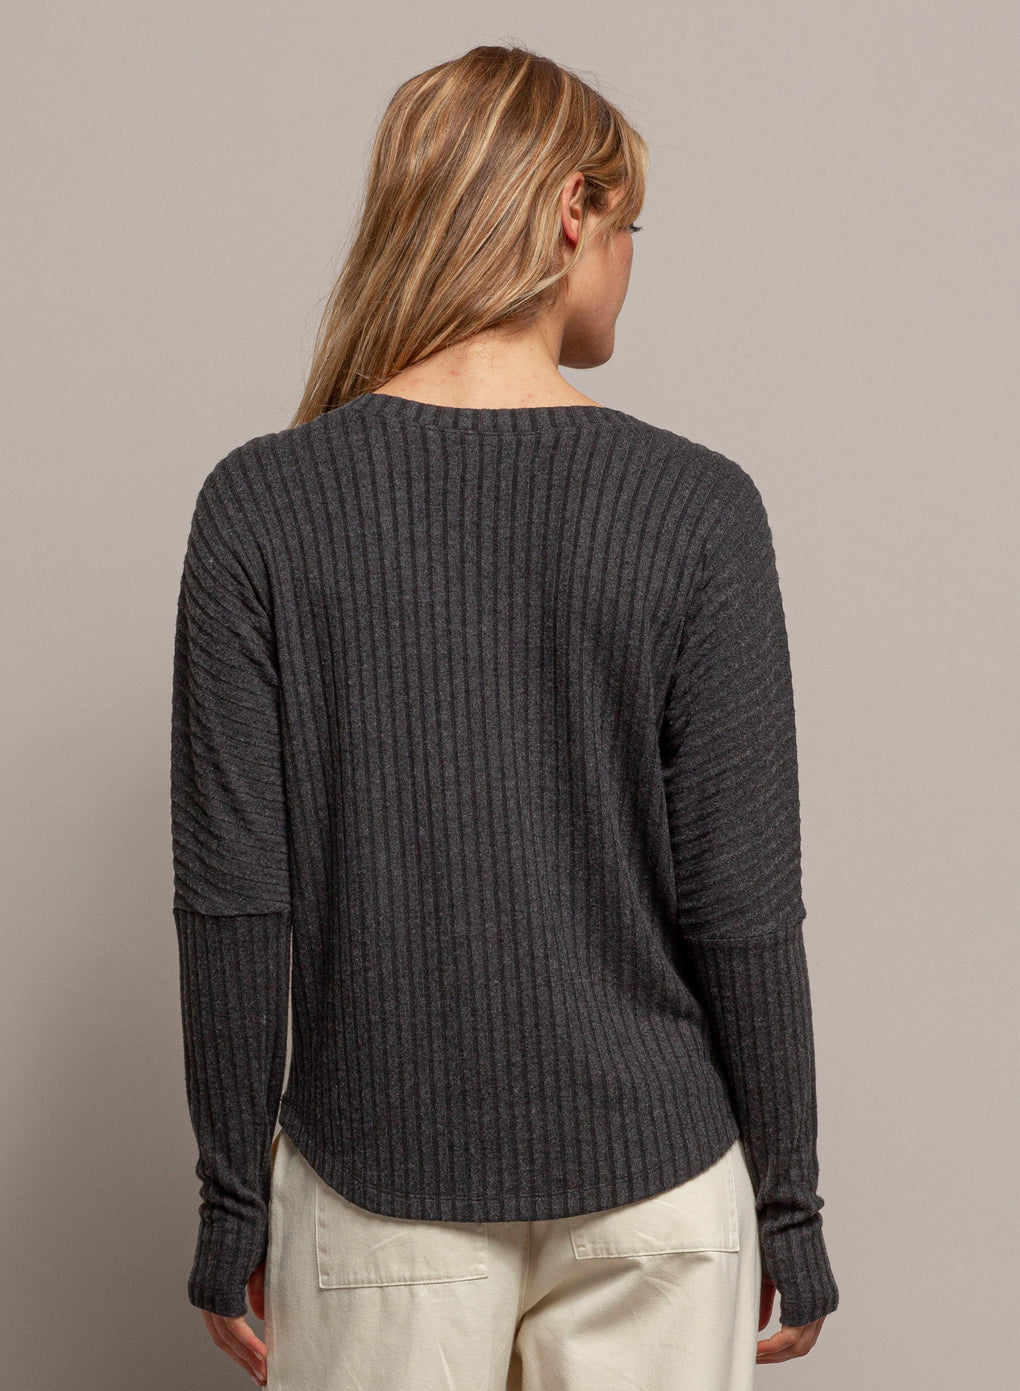 Dolman V Neck Top with Thumbholes